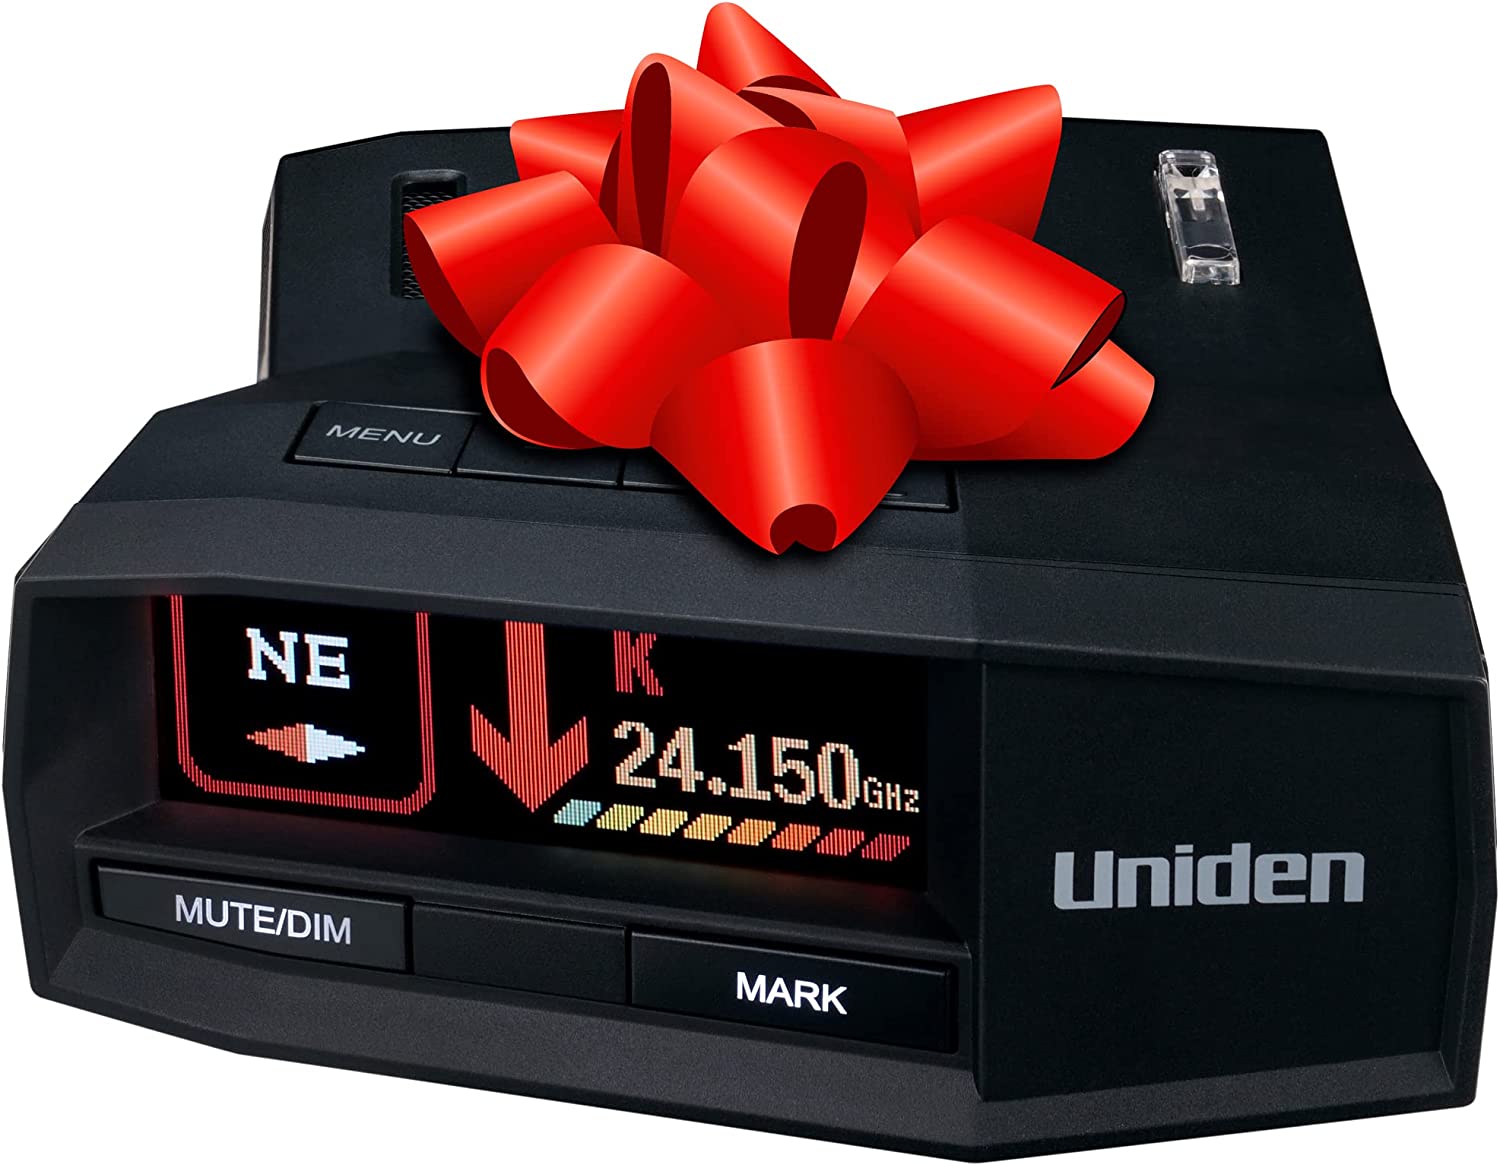 UNIDEN R8 Extreme Long-Range Radar/Laser Detector, Dual-Antennas Front & Rear Detection w/Directional Arrows, Built-in GPS w/Real-Time Alerts, Voice Alerts,  , only $629.99